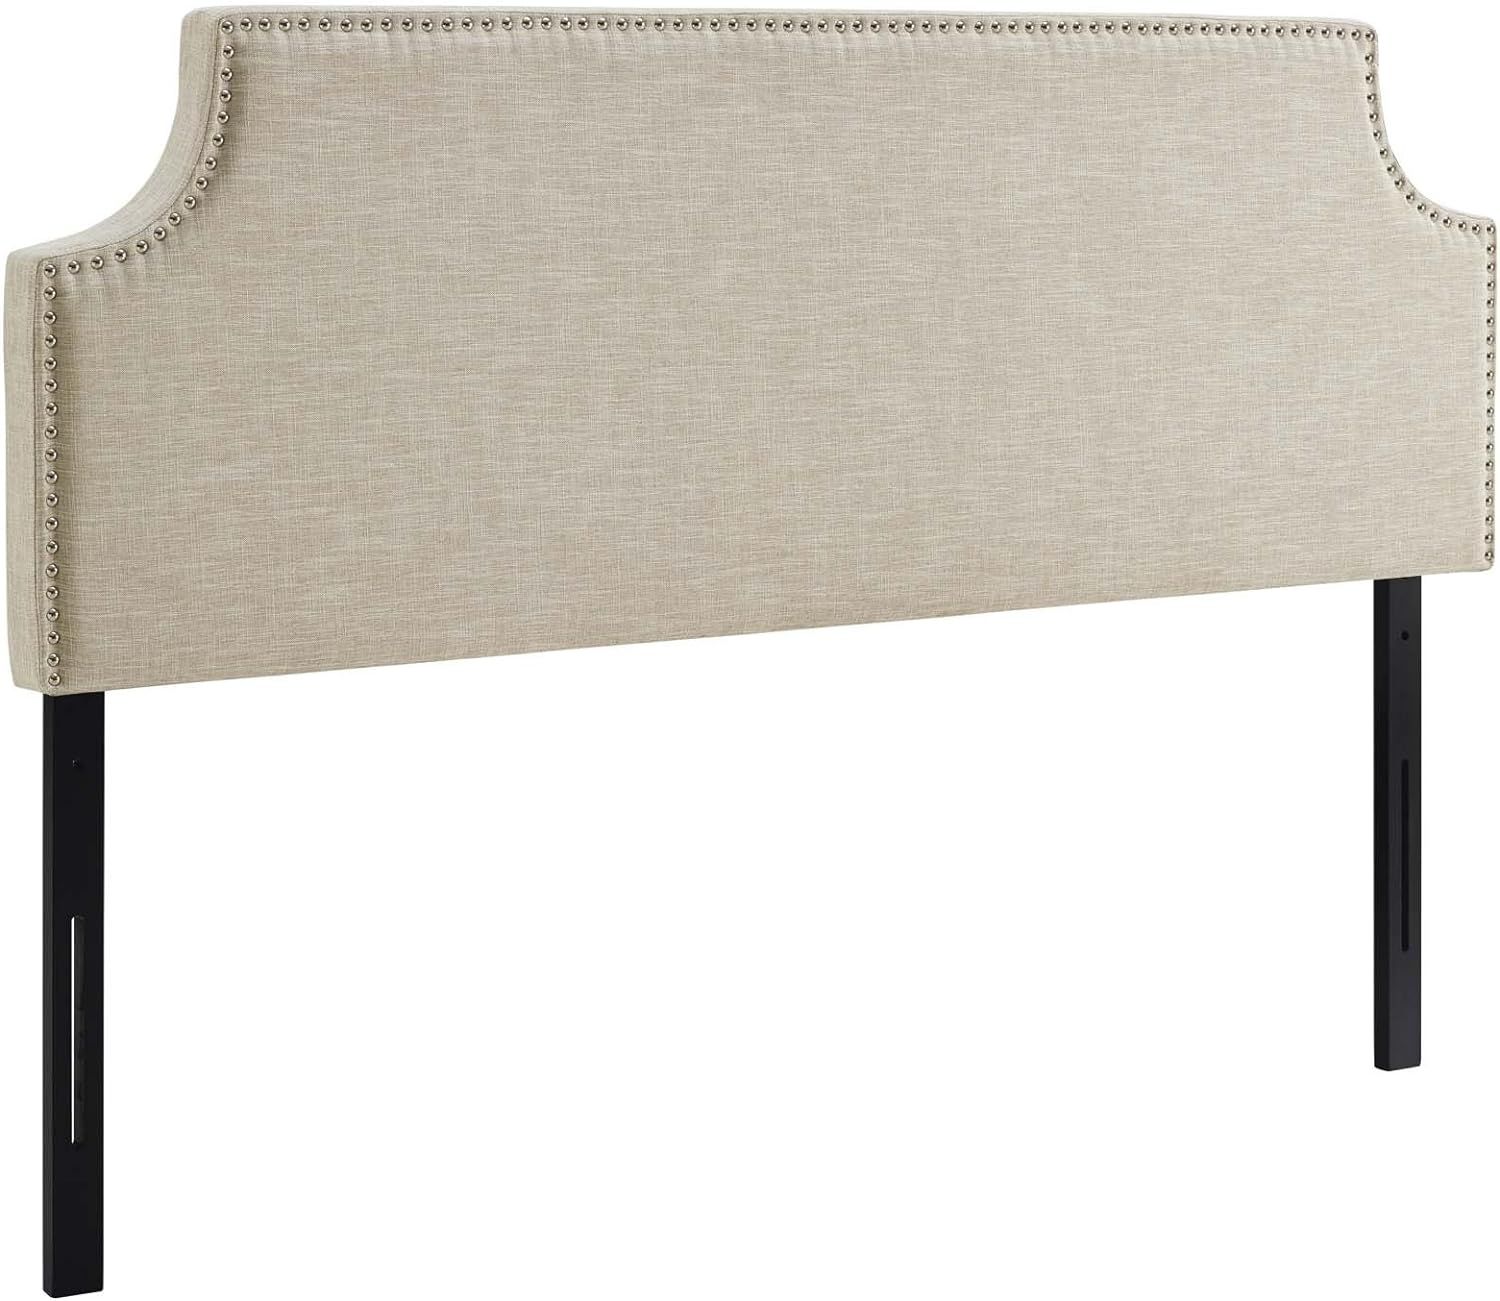 Modway Laura Upholstered Fabric Full Headboard Size With Cut-Out Edges and Nailhead Trim in Beige | Amazon (US)